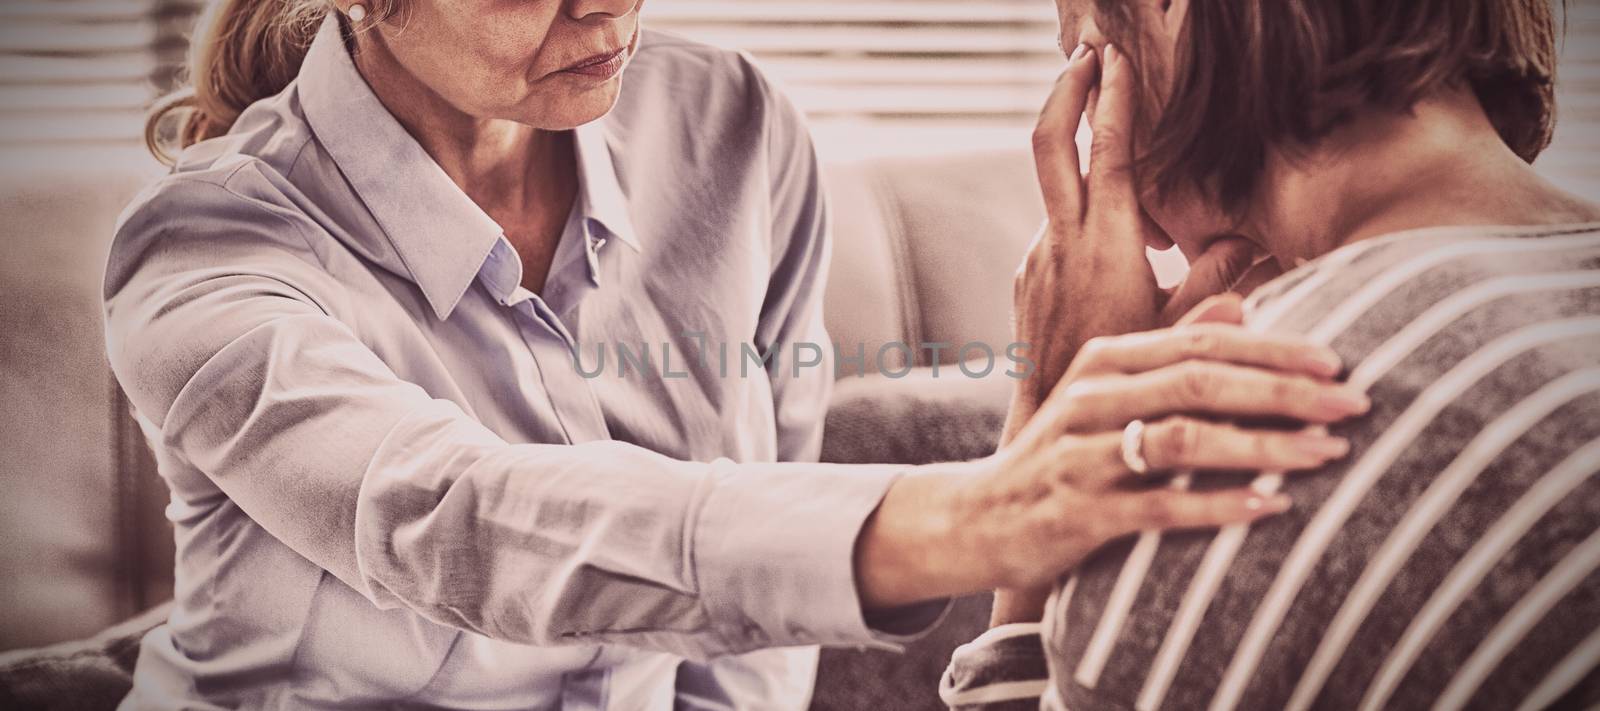 Therapist comforting patient on sofa at home